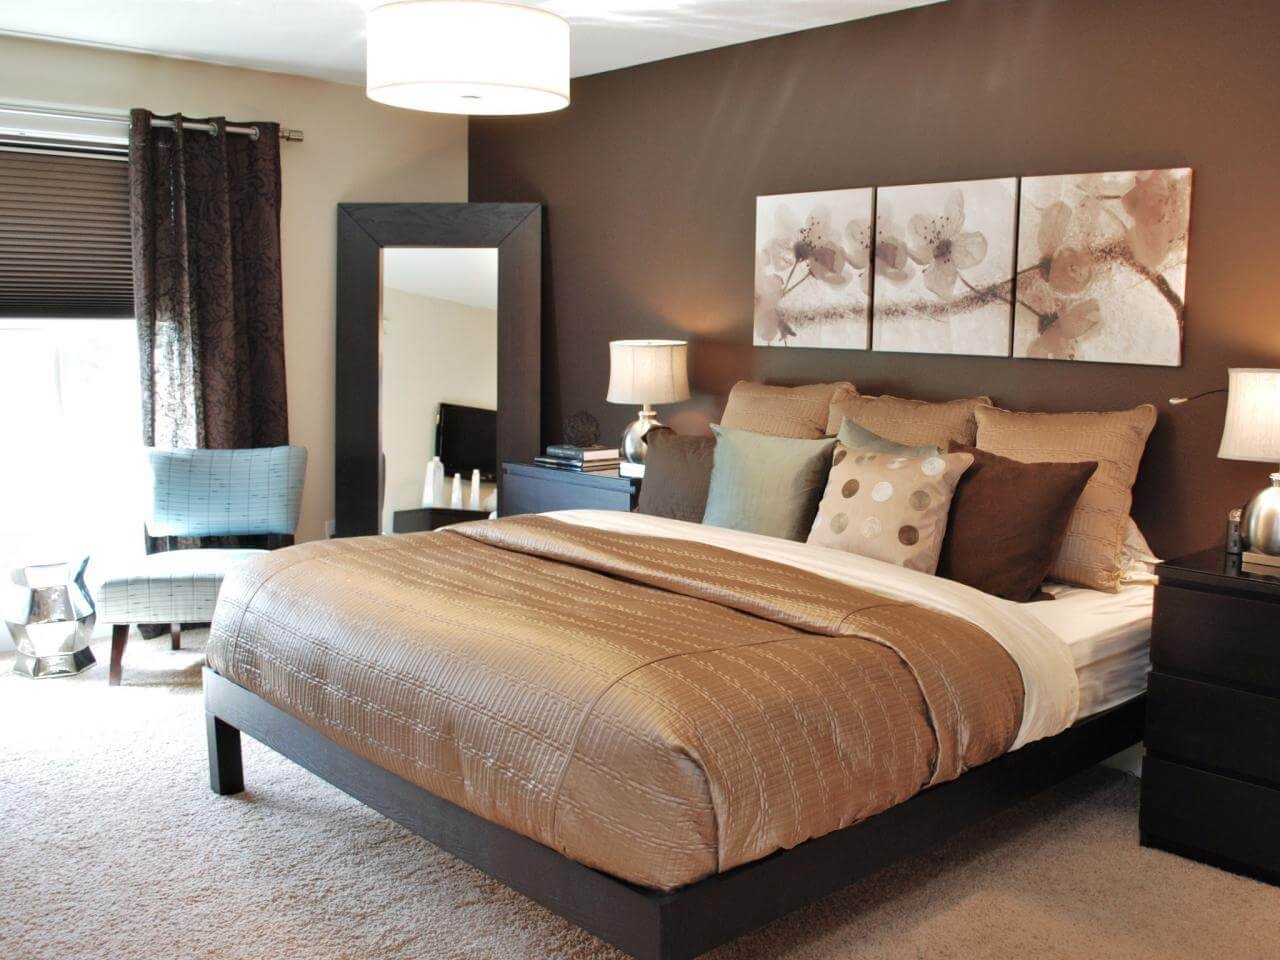 Navy blue and brown bedroom